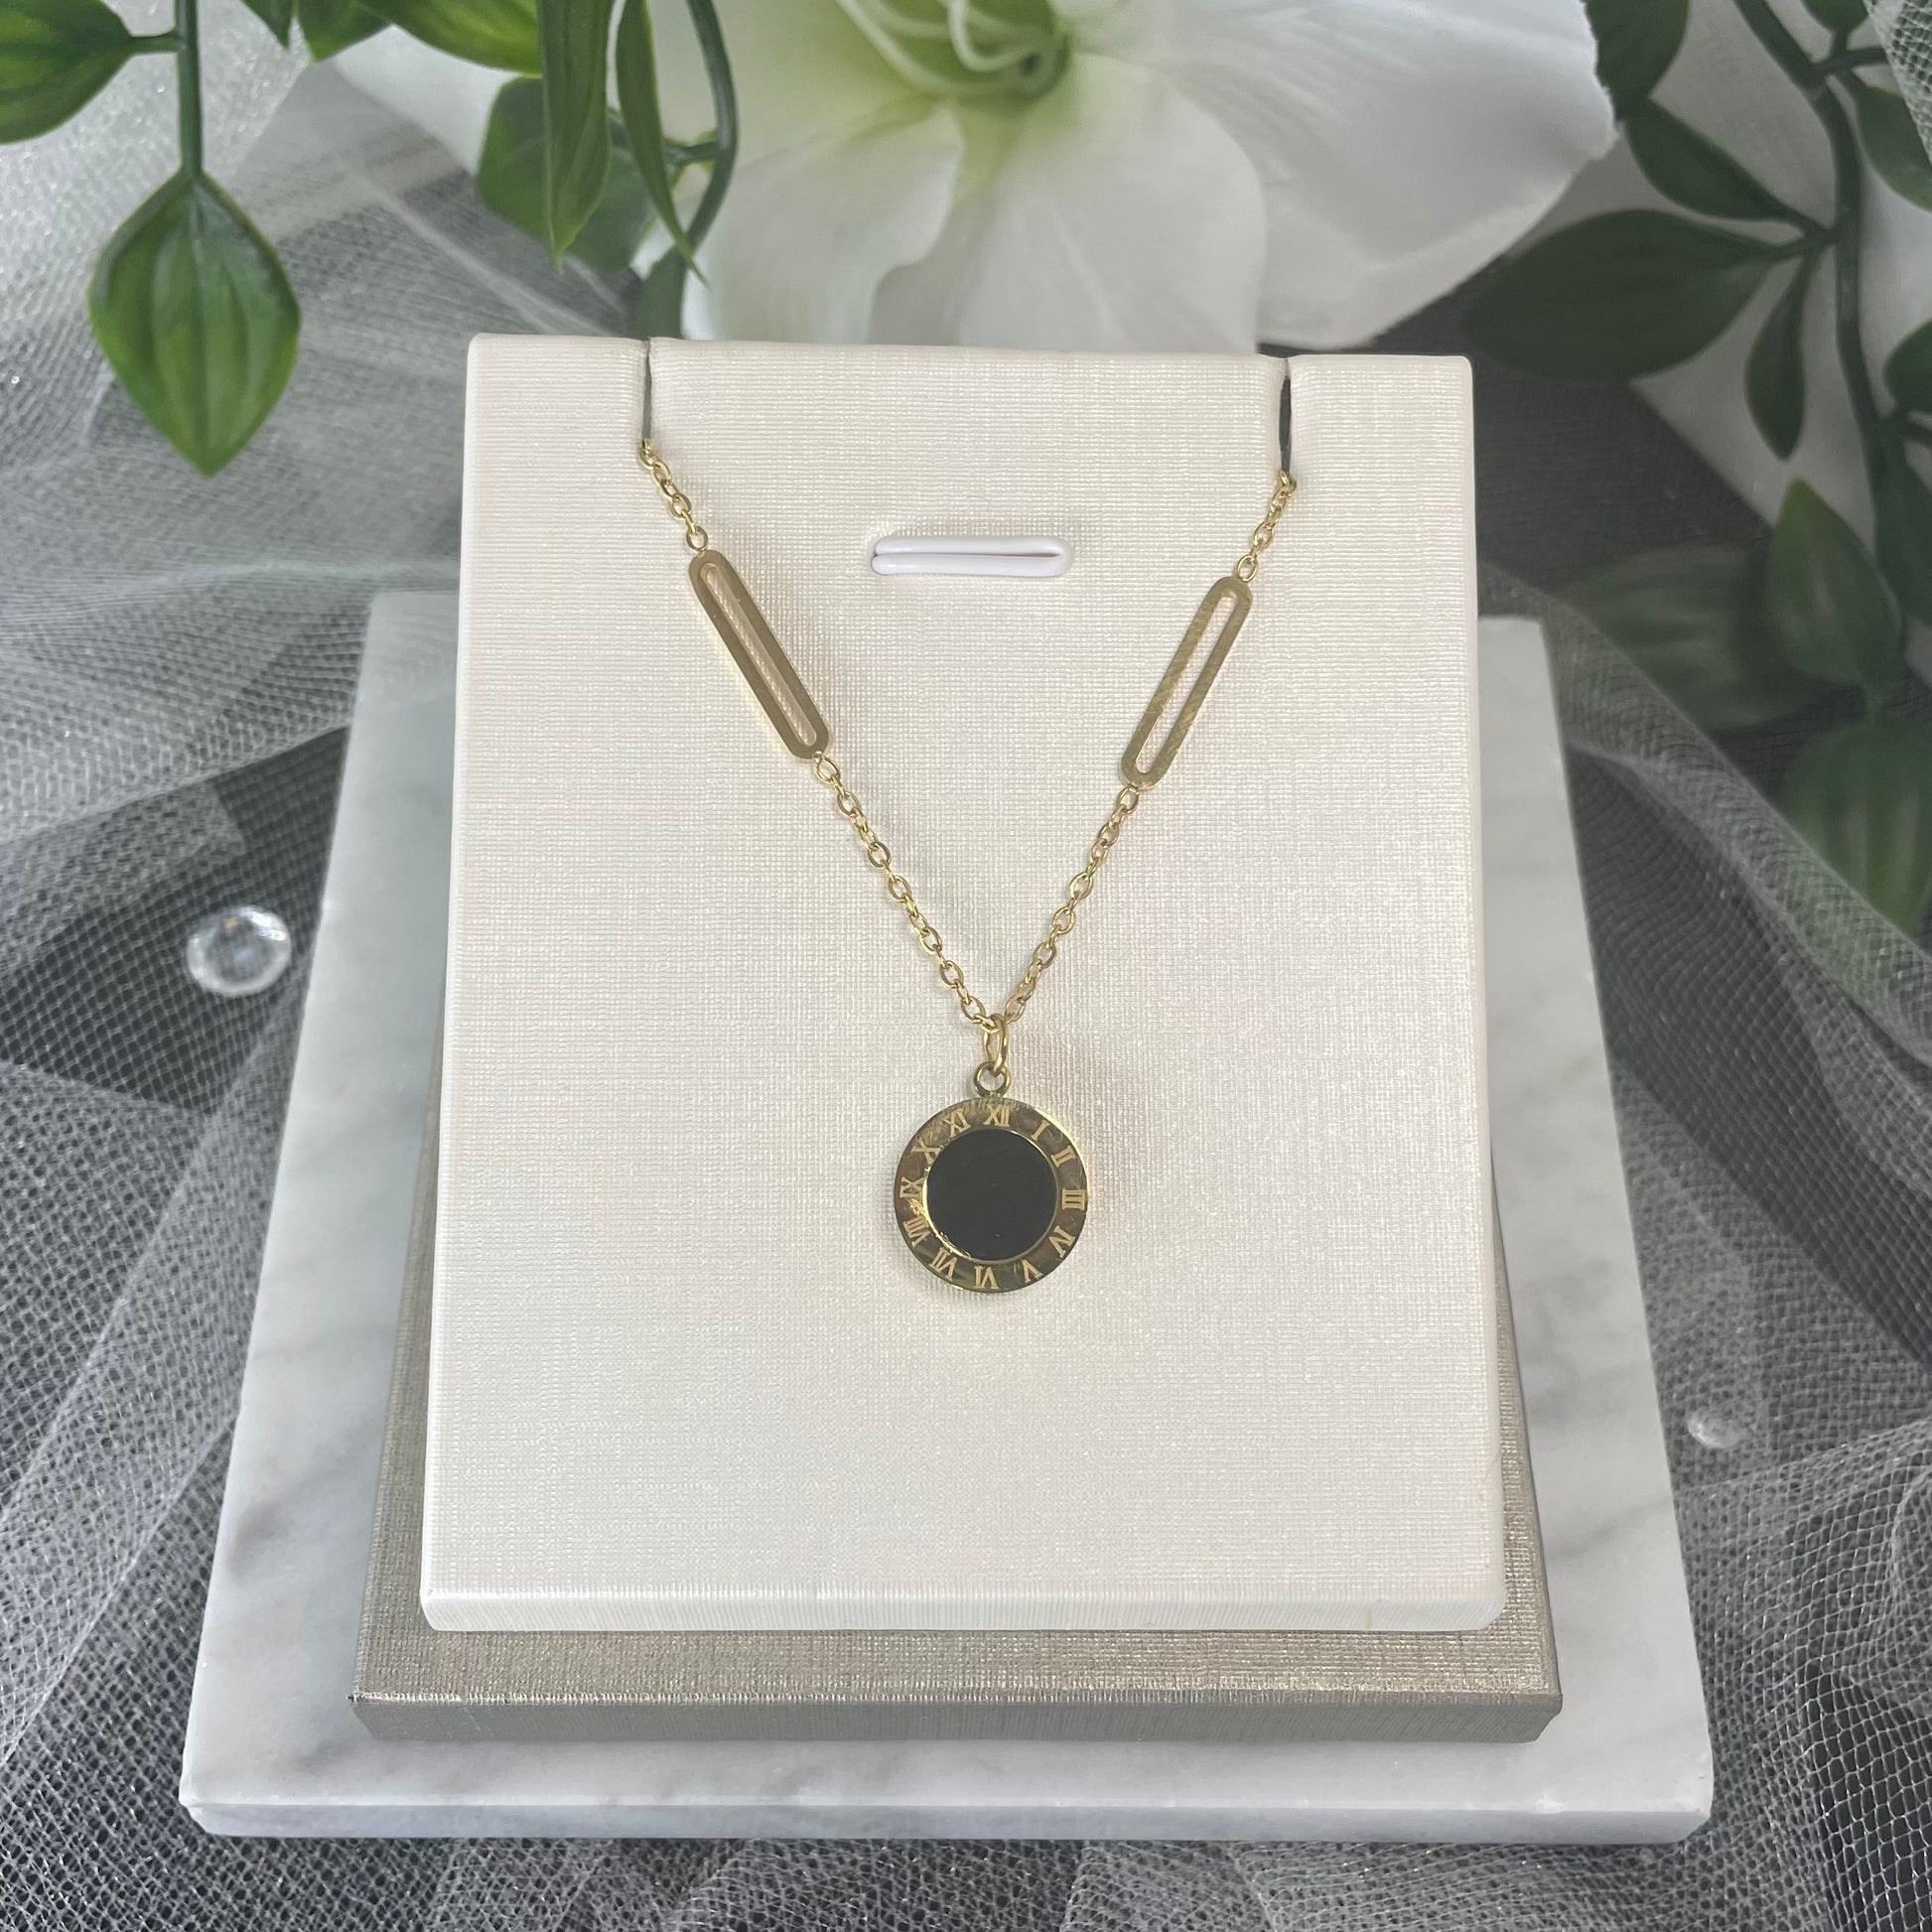 Adorn bridal necklace with reversible black & white Roman digital wafer pendant, gold accents, and stainless steel chain.